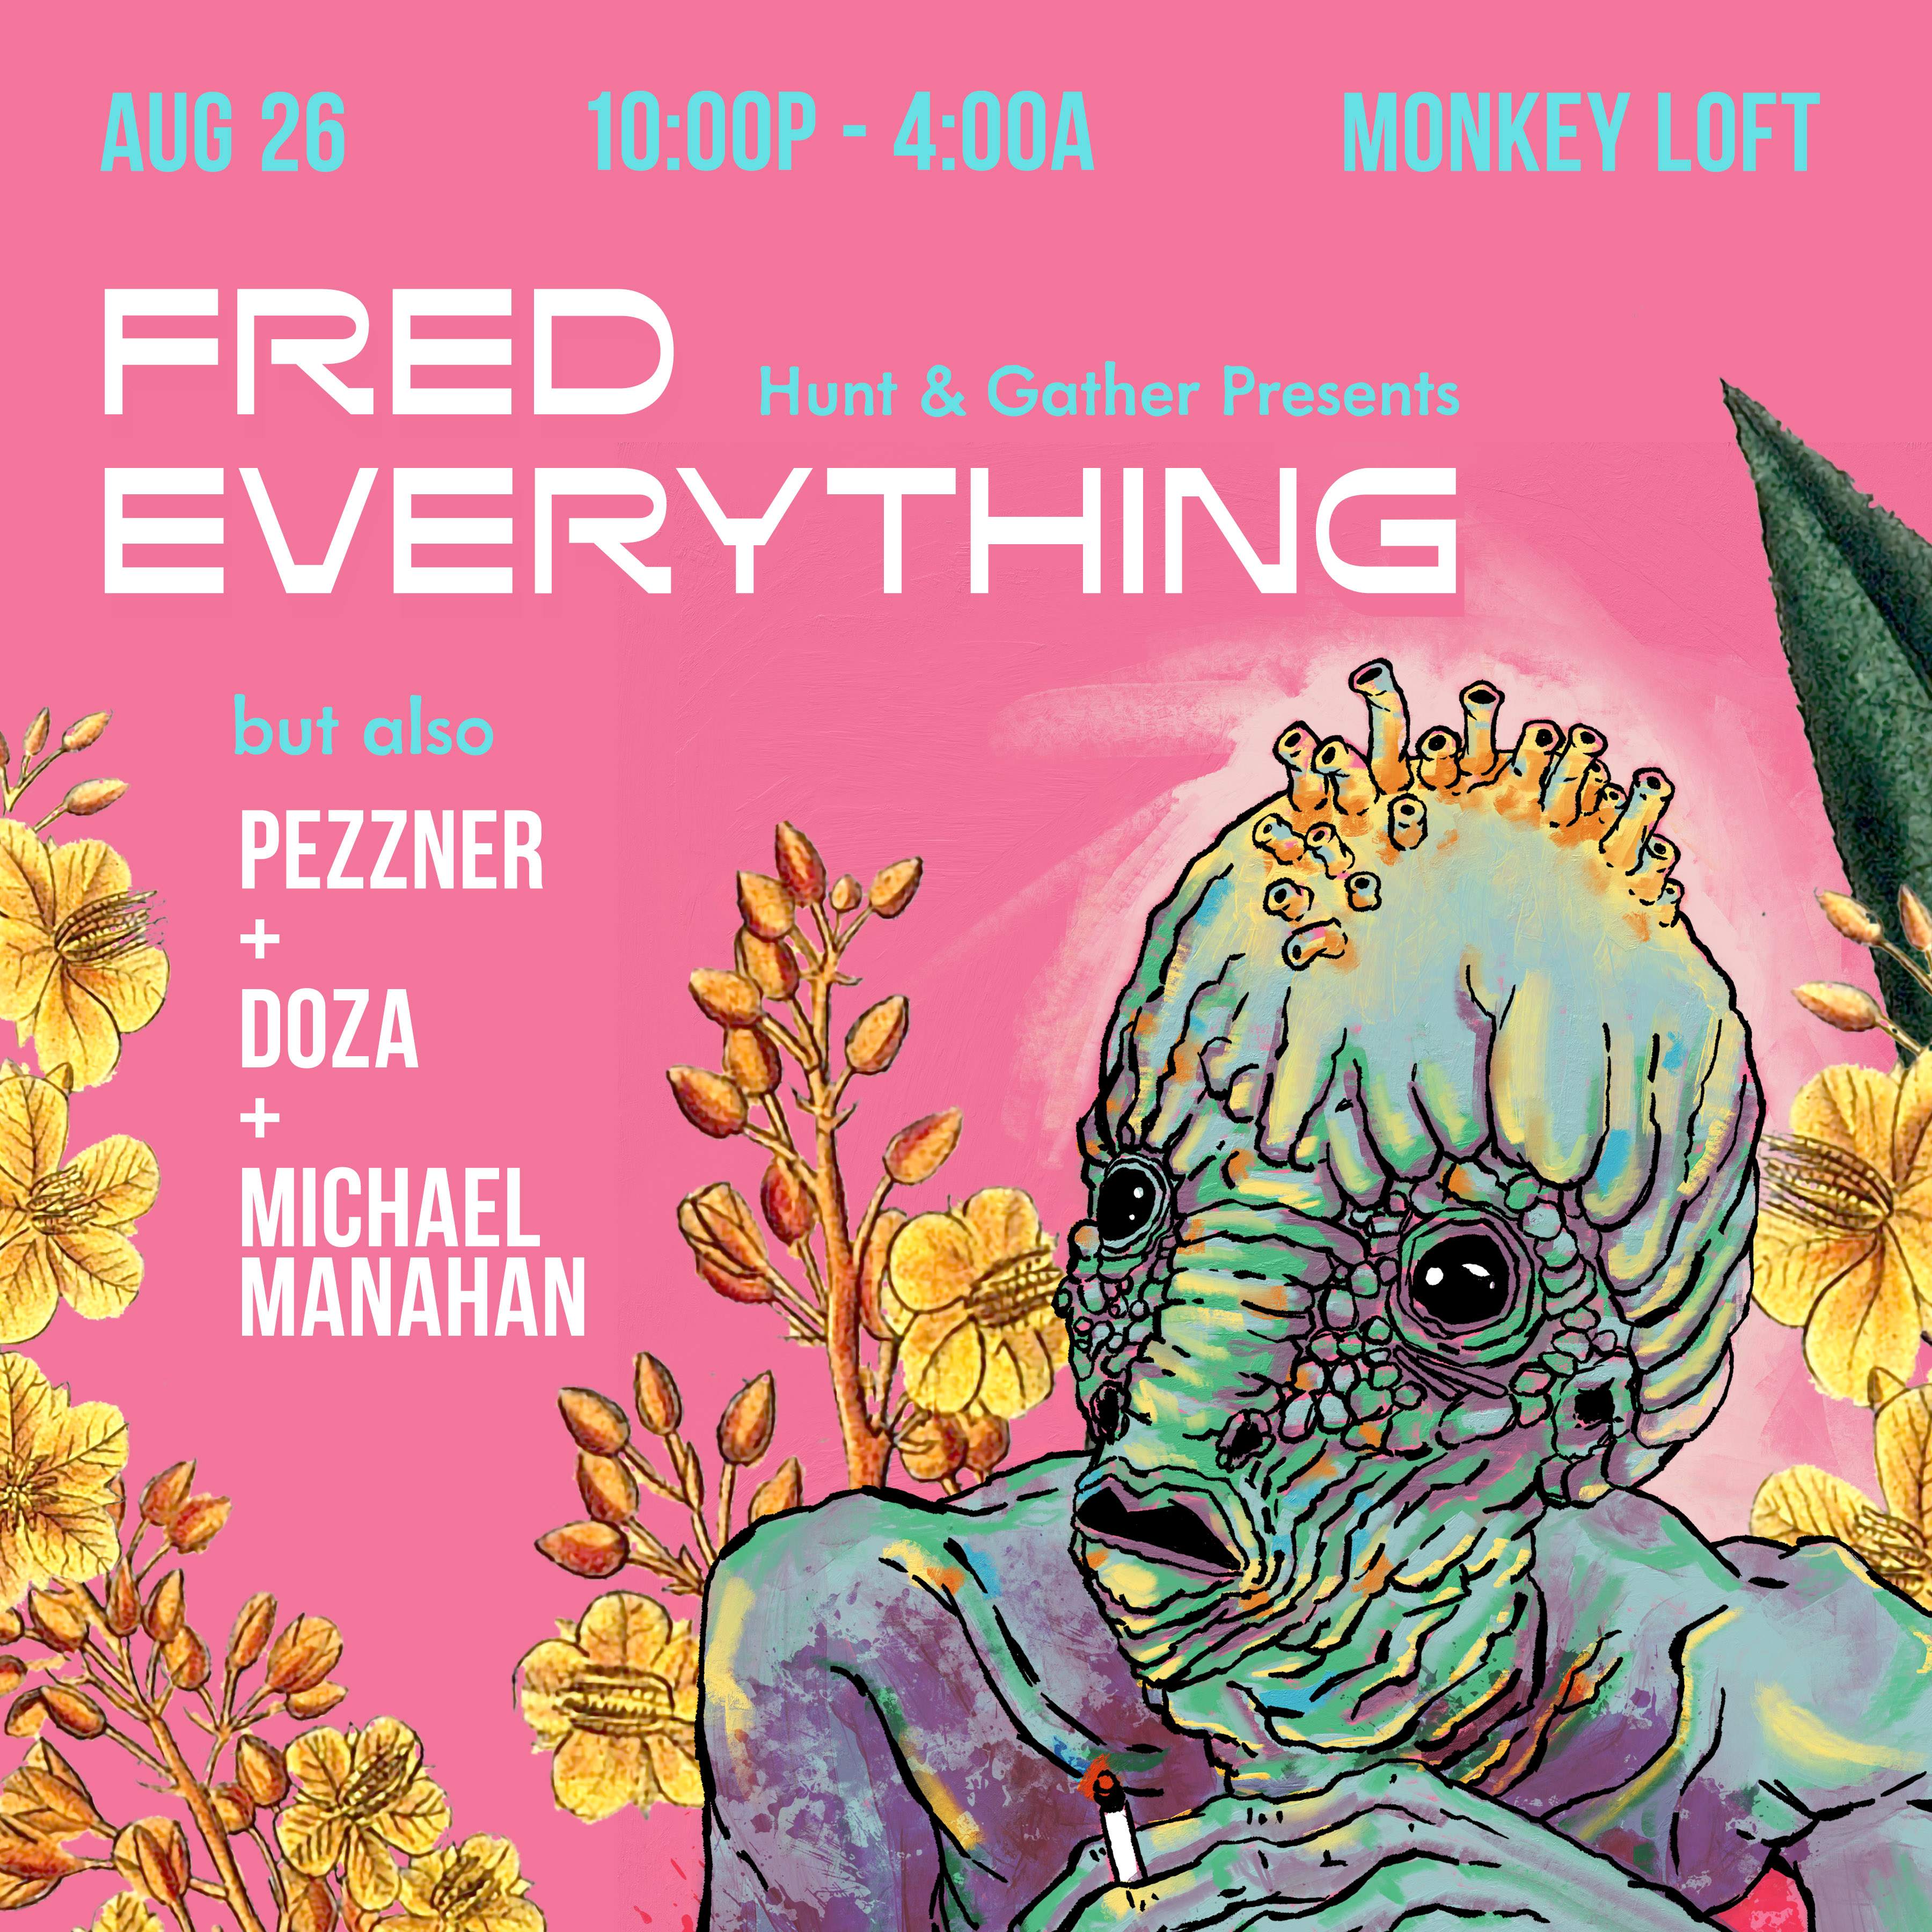 Fred Everything with Pezzner, Doza & Michael Manahan - Página frontal